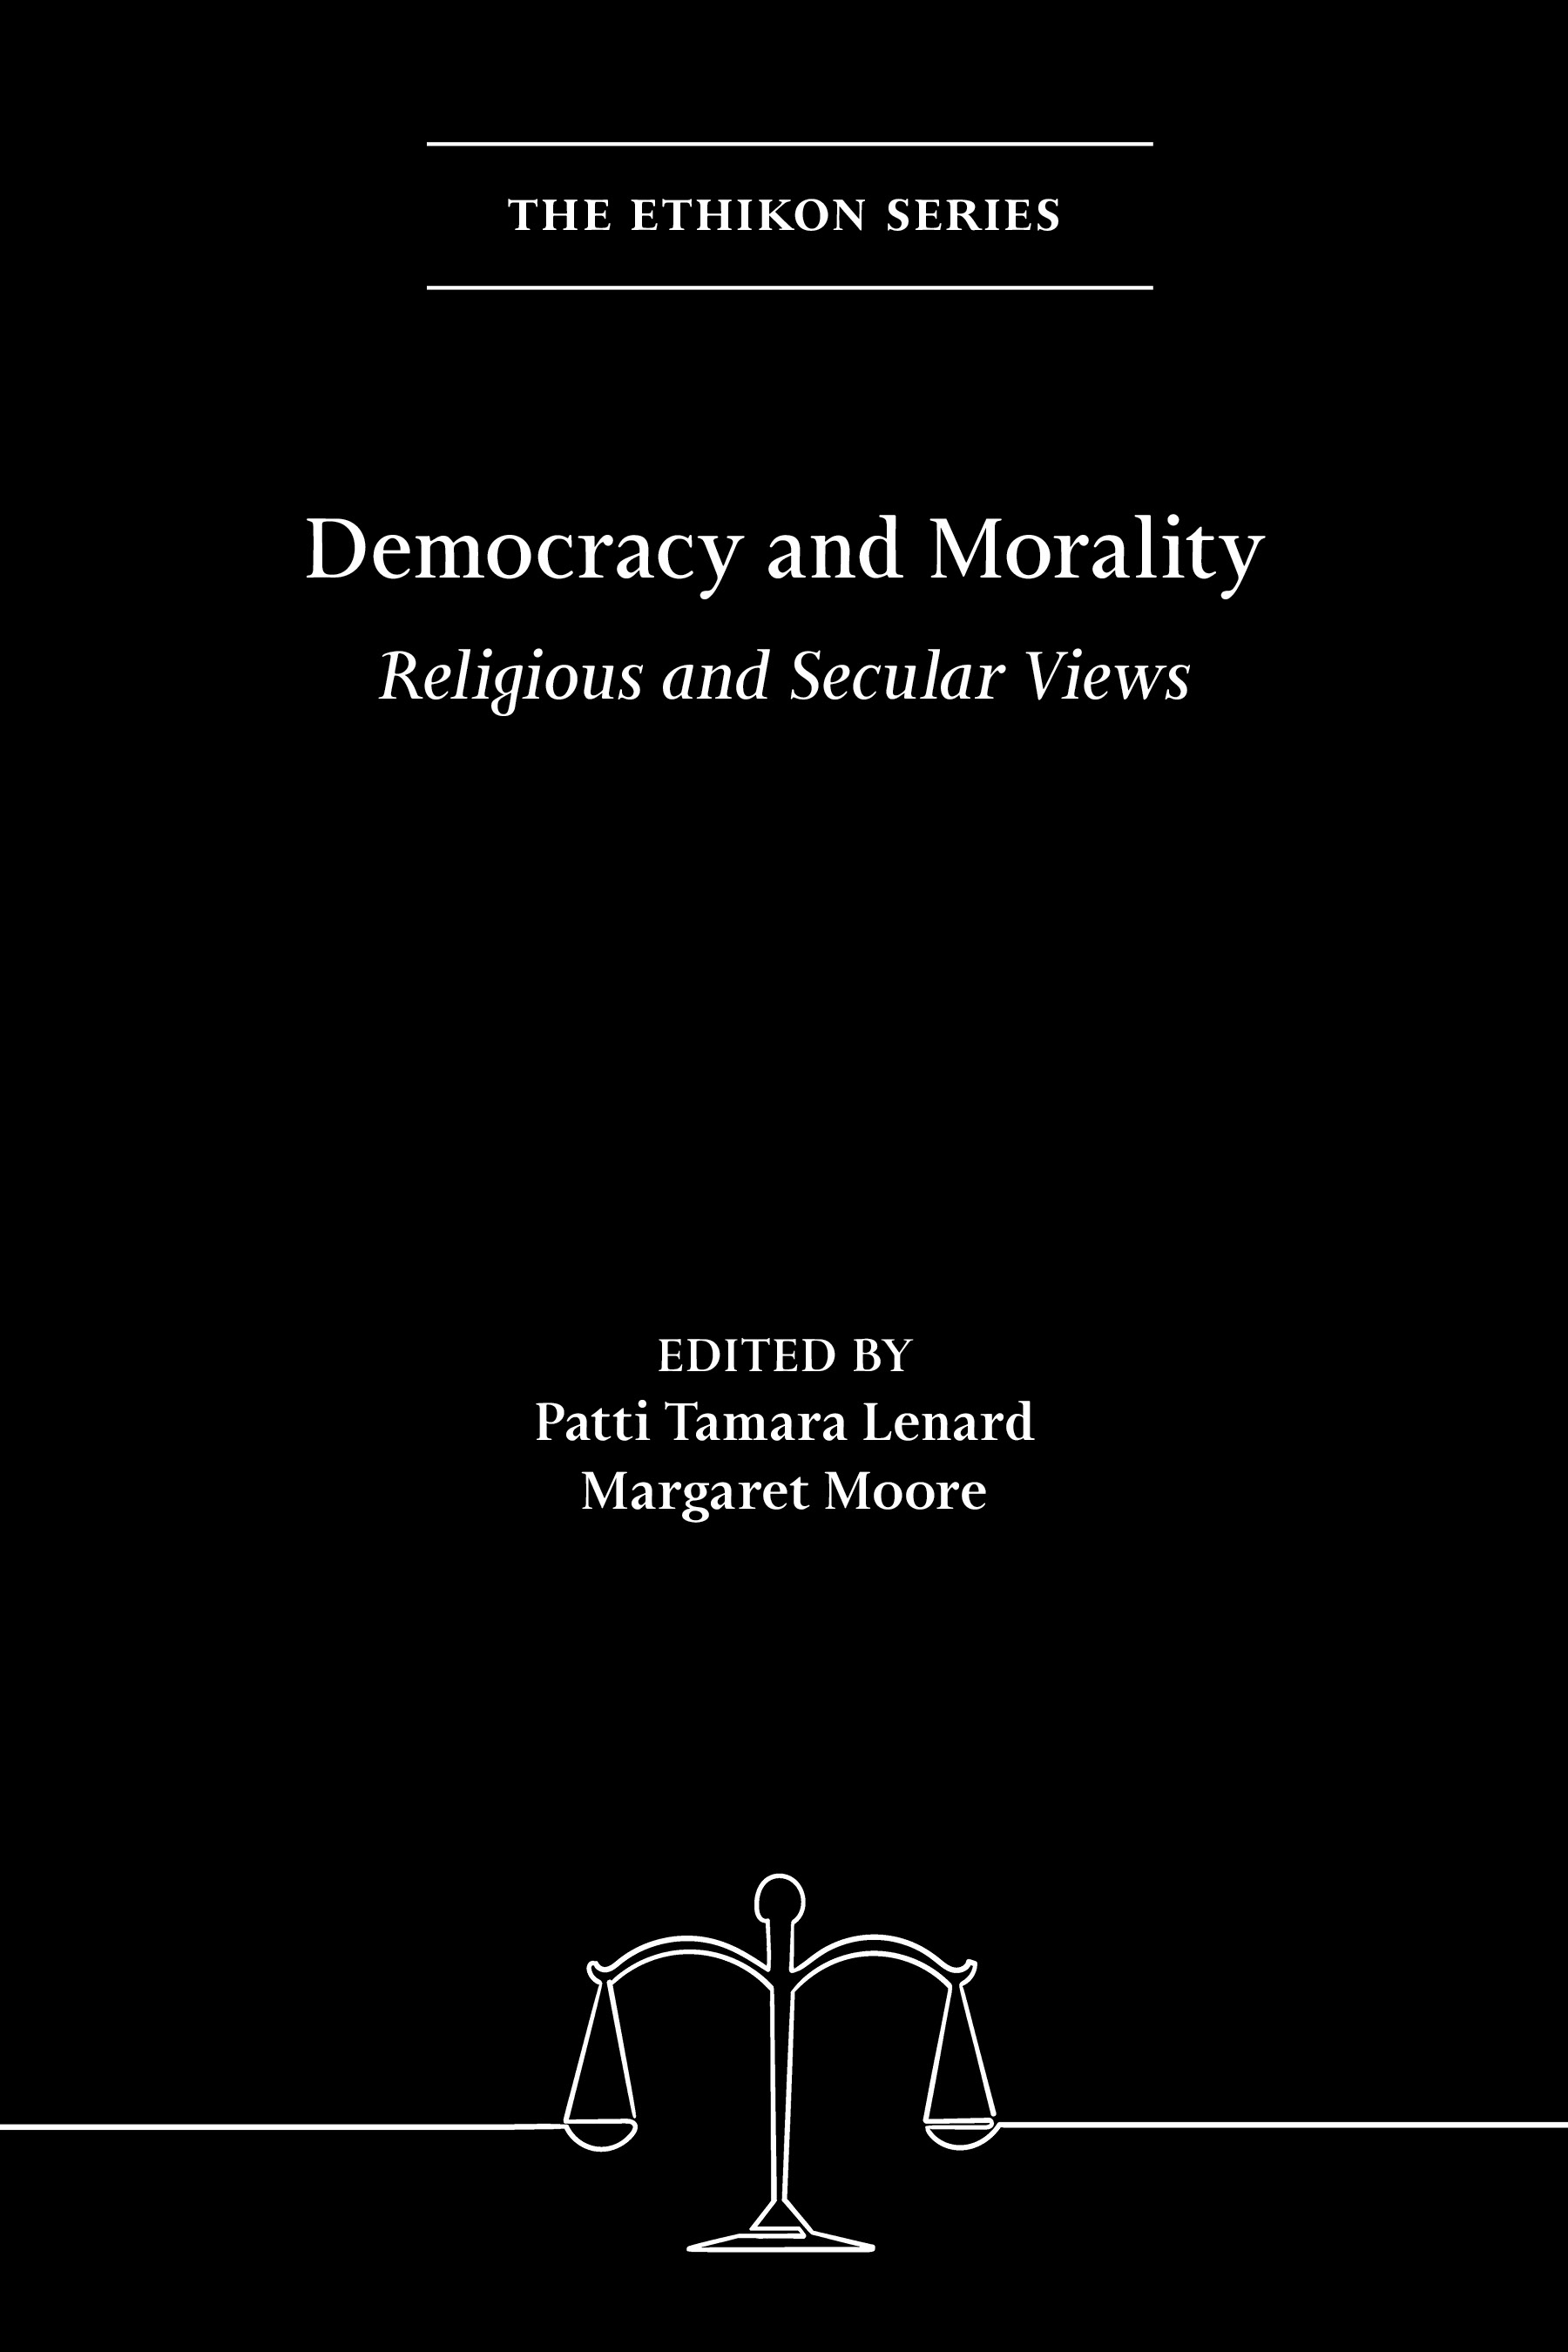 Democracy and Morality: Religious and Secular Views